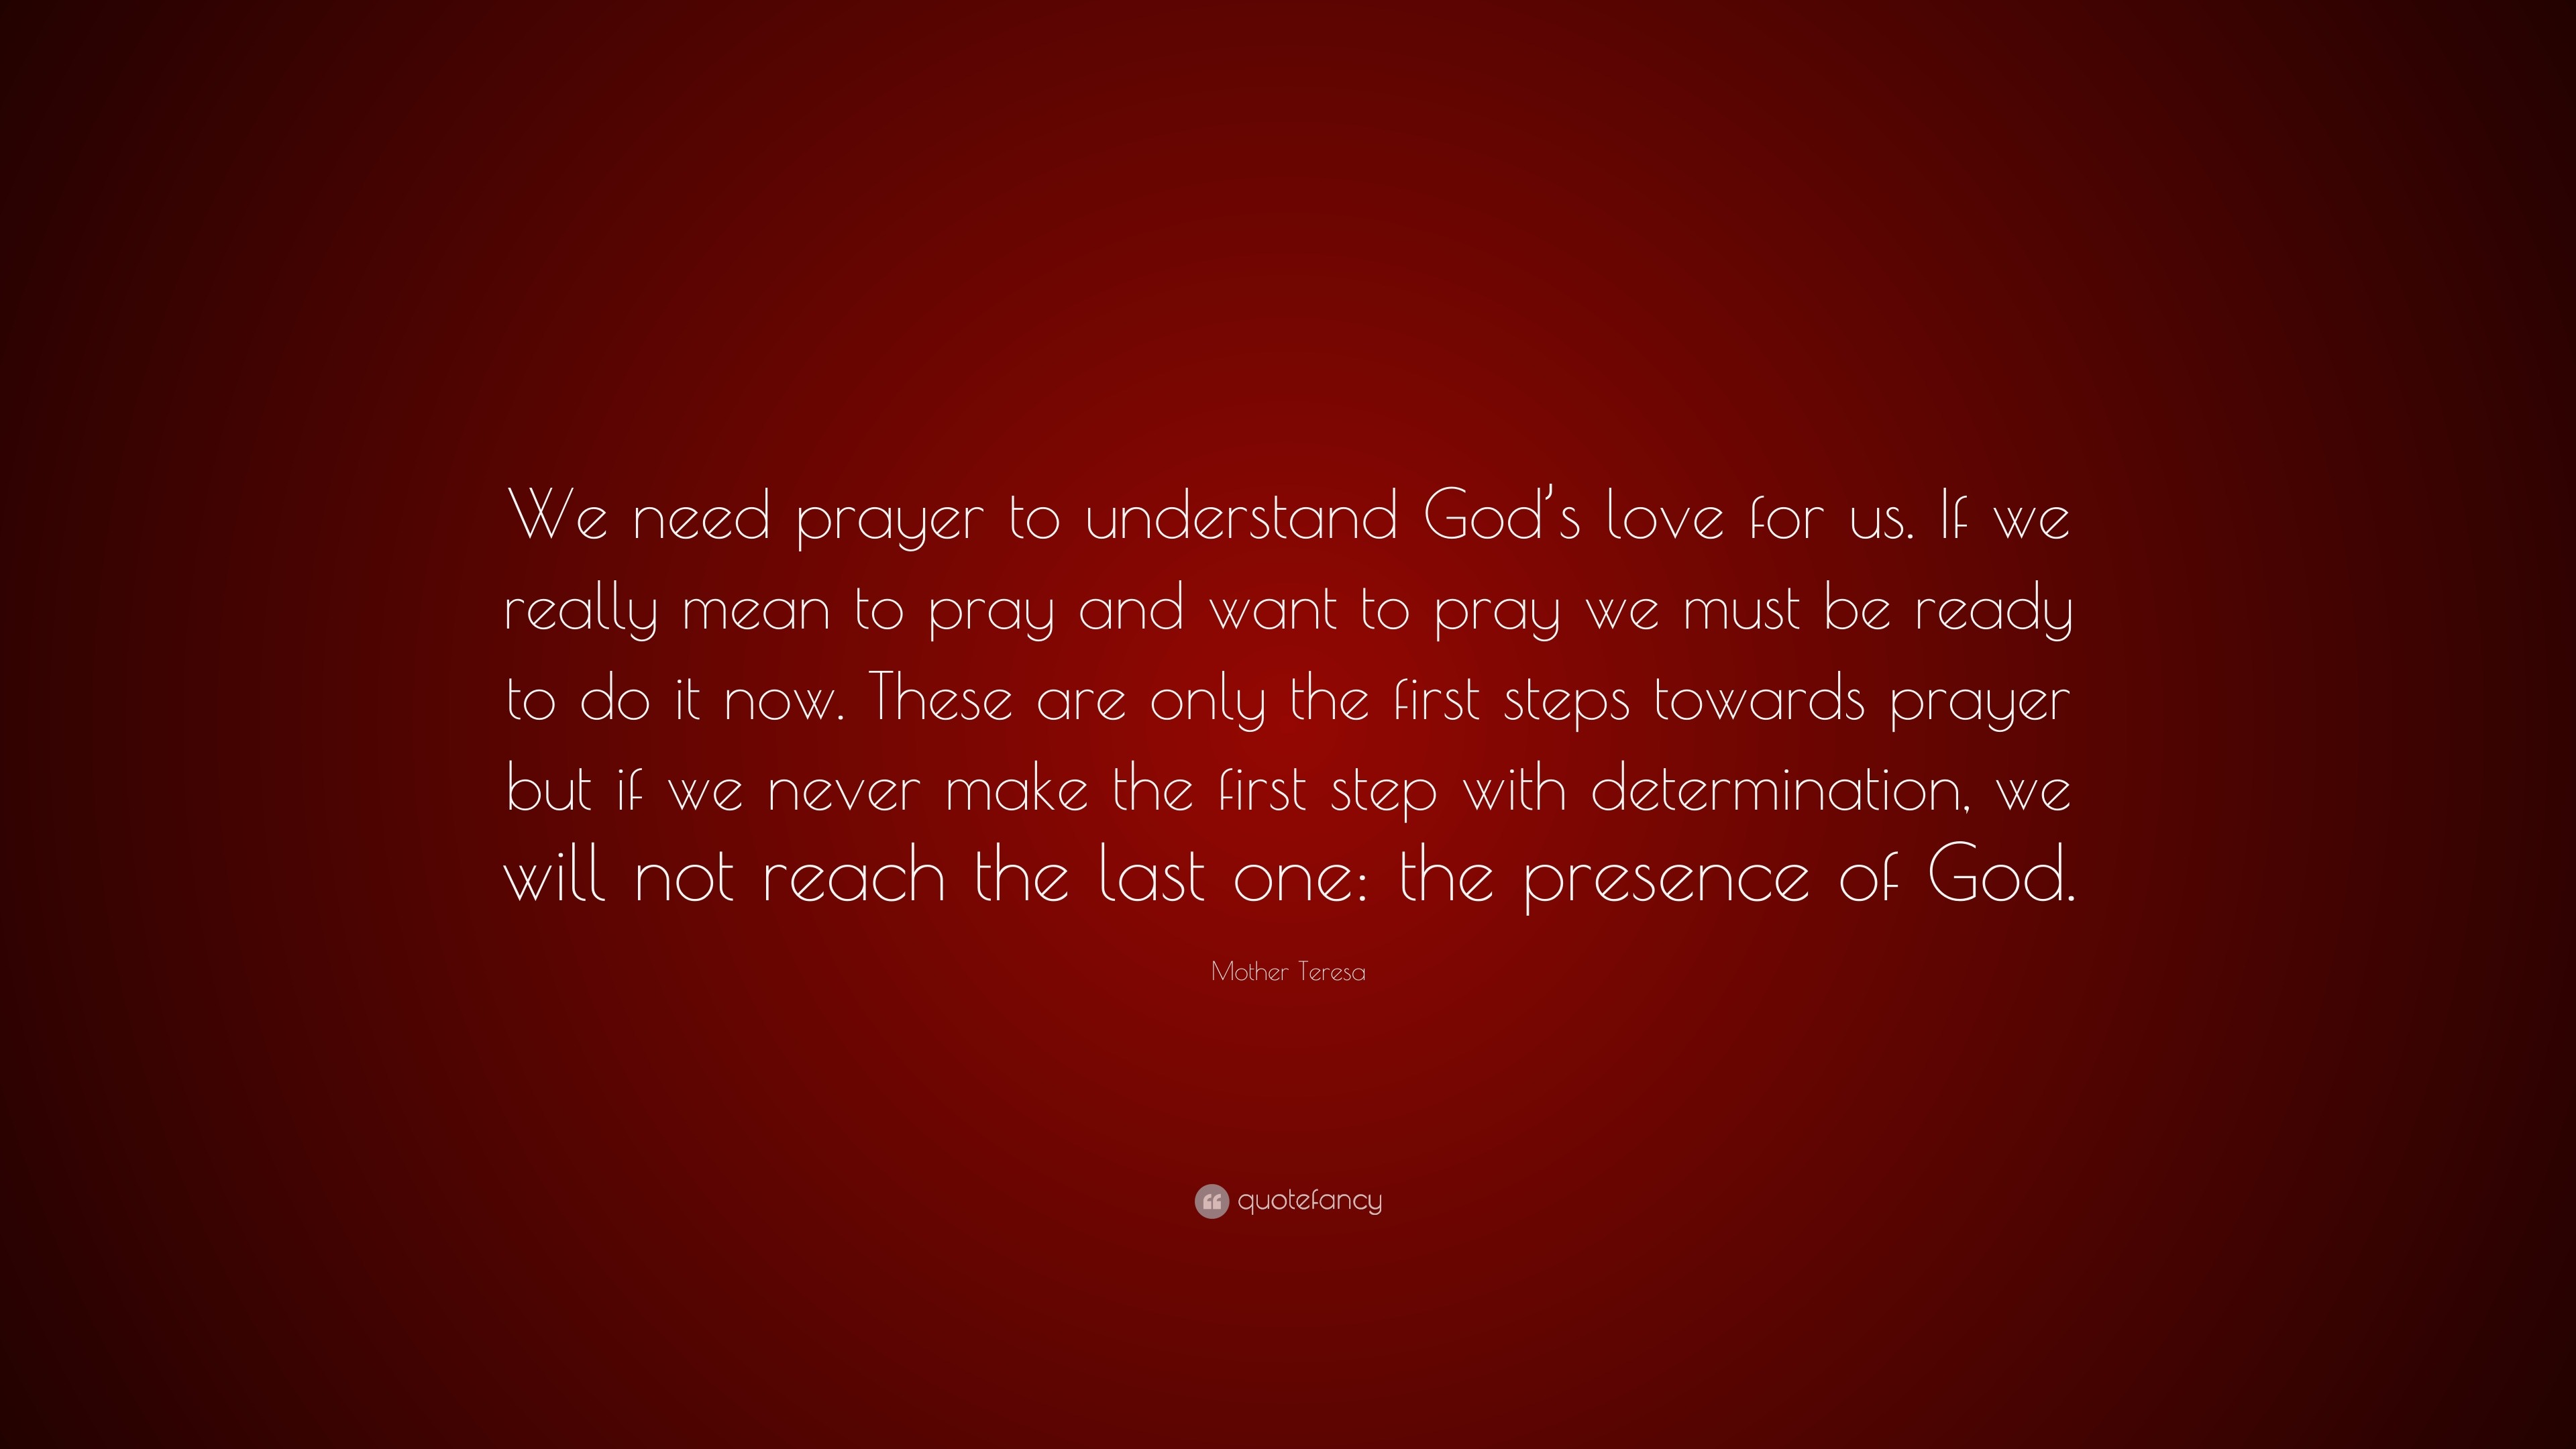 Mother Teresa Quote “We need prayer to understand God s love for us If